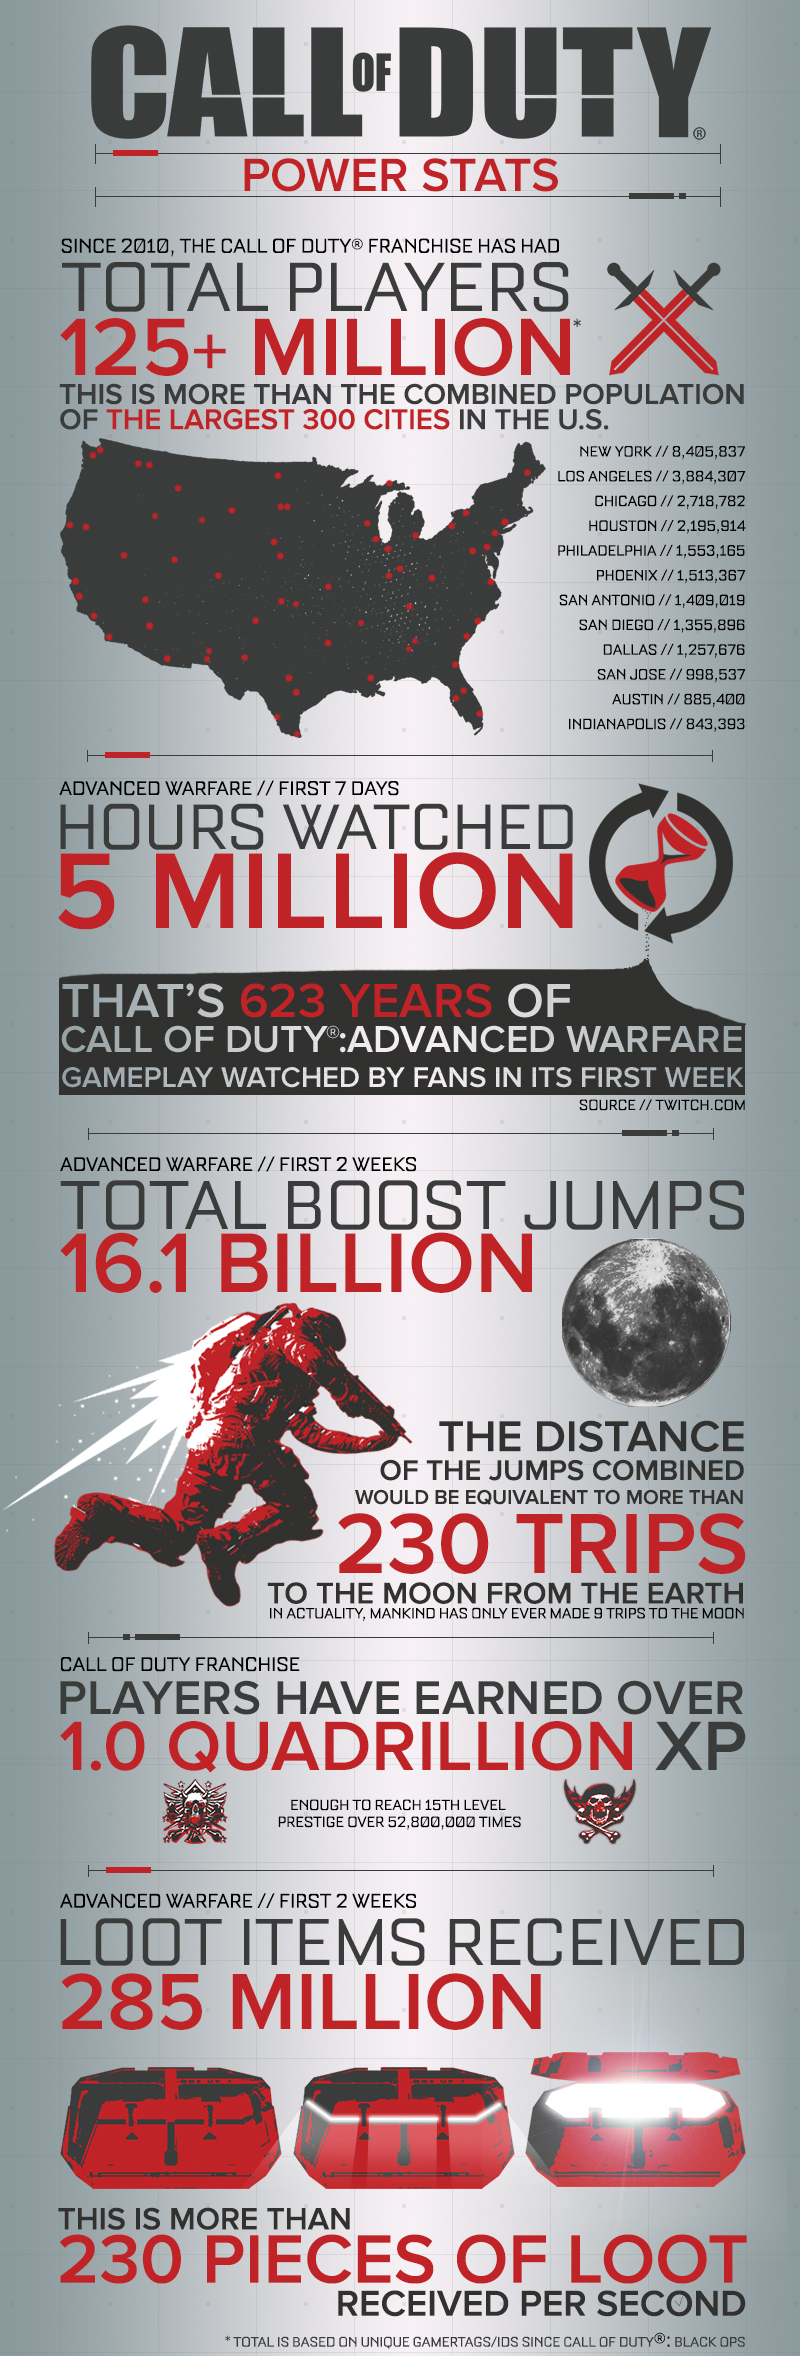 Call-of-Duty-Infographic